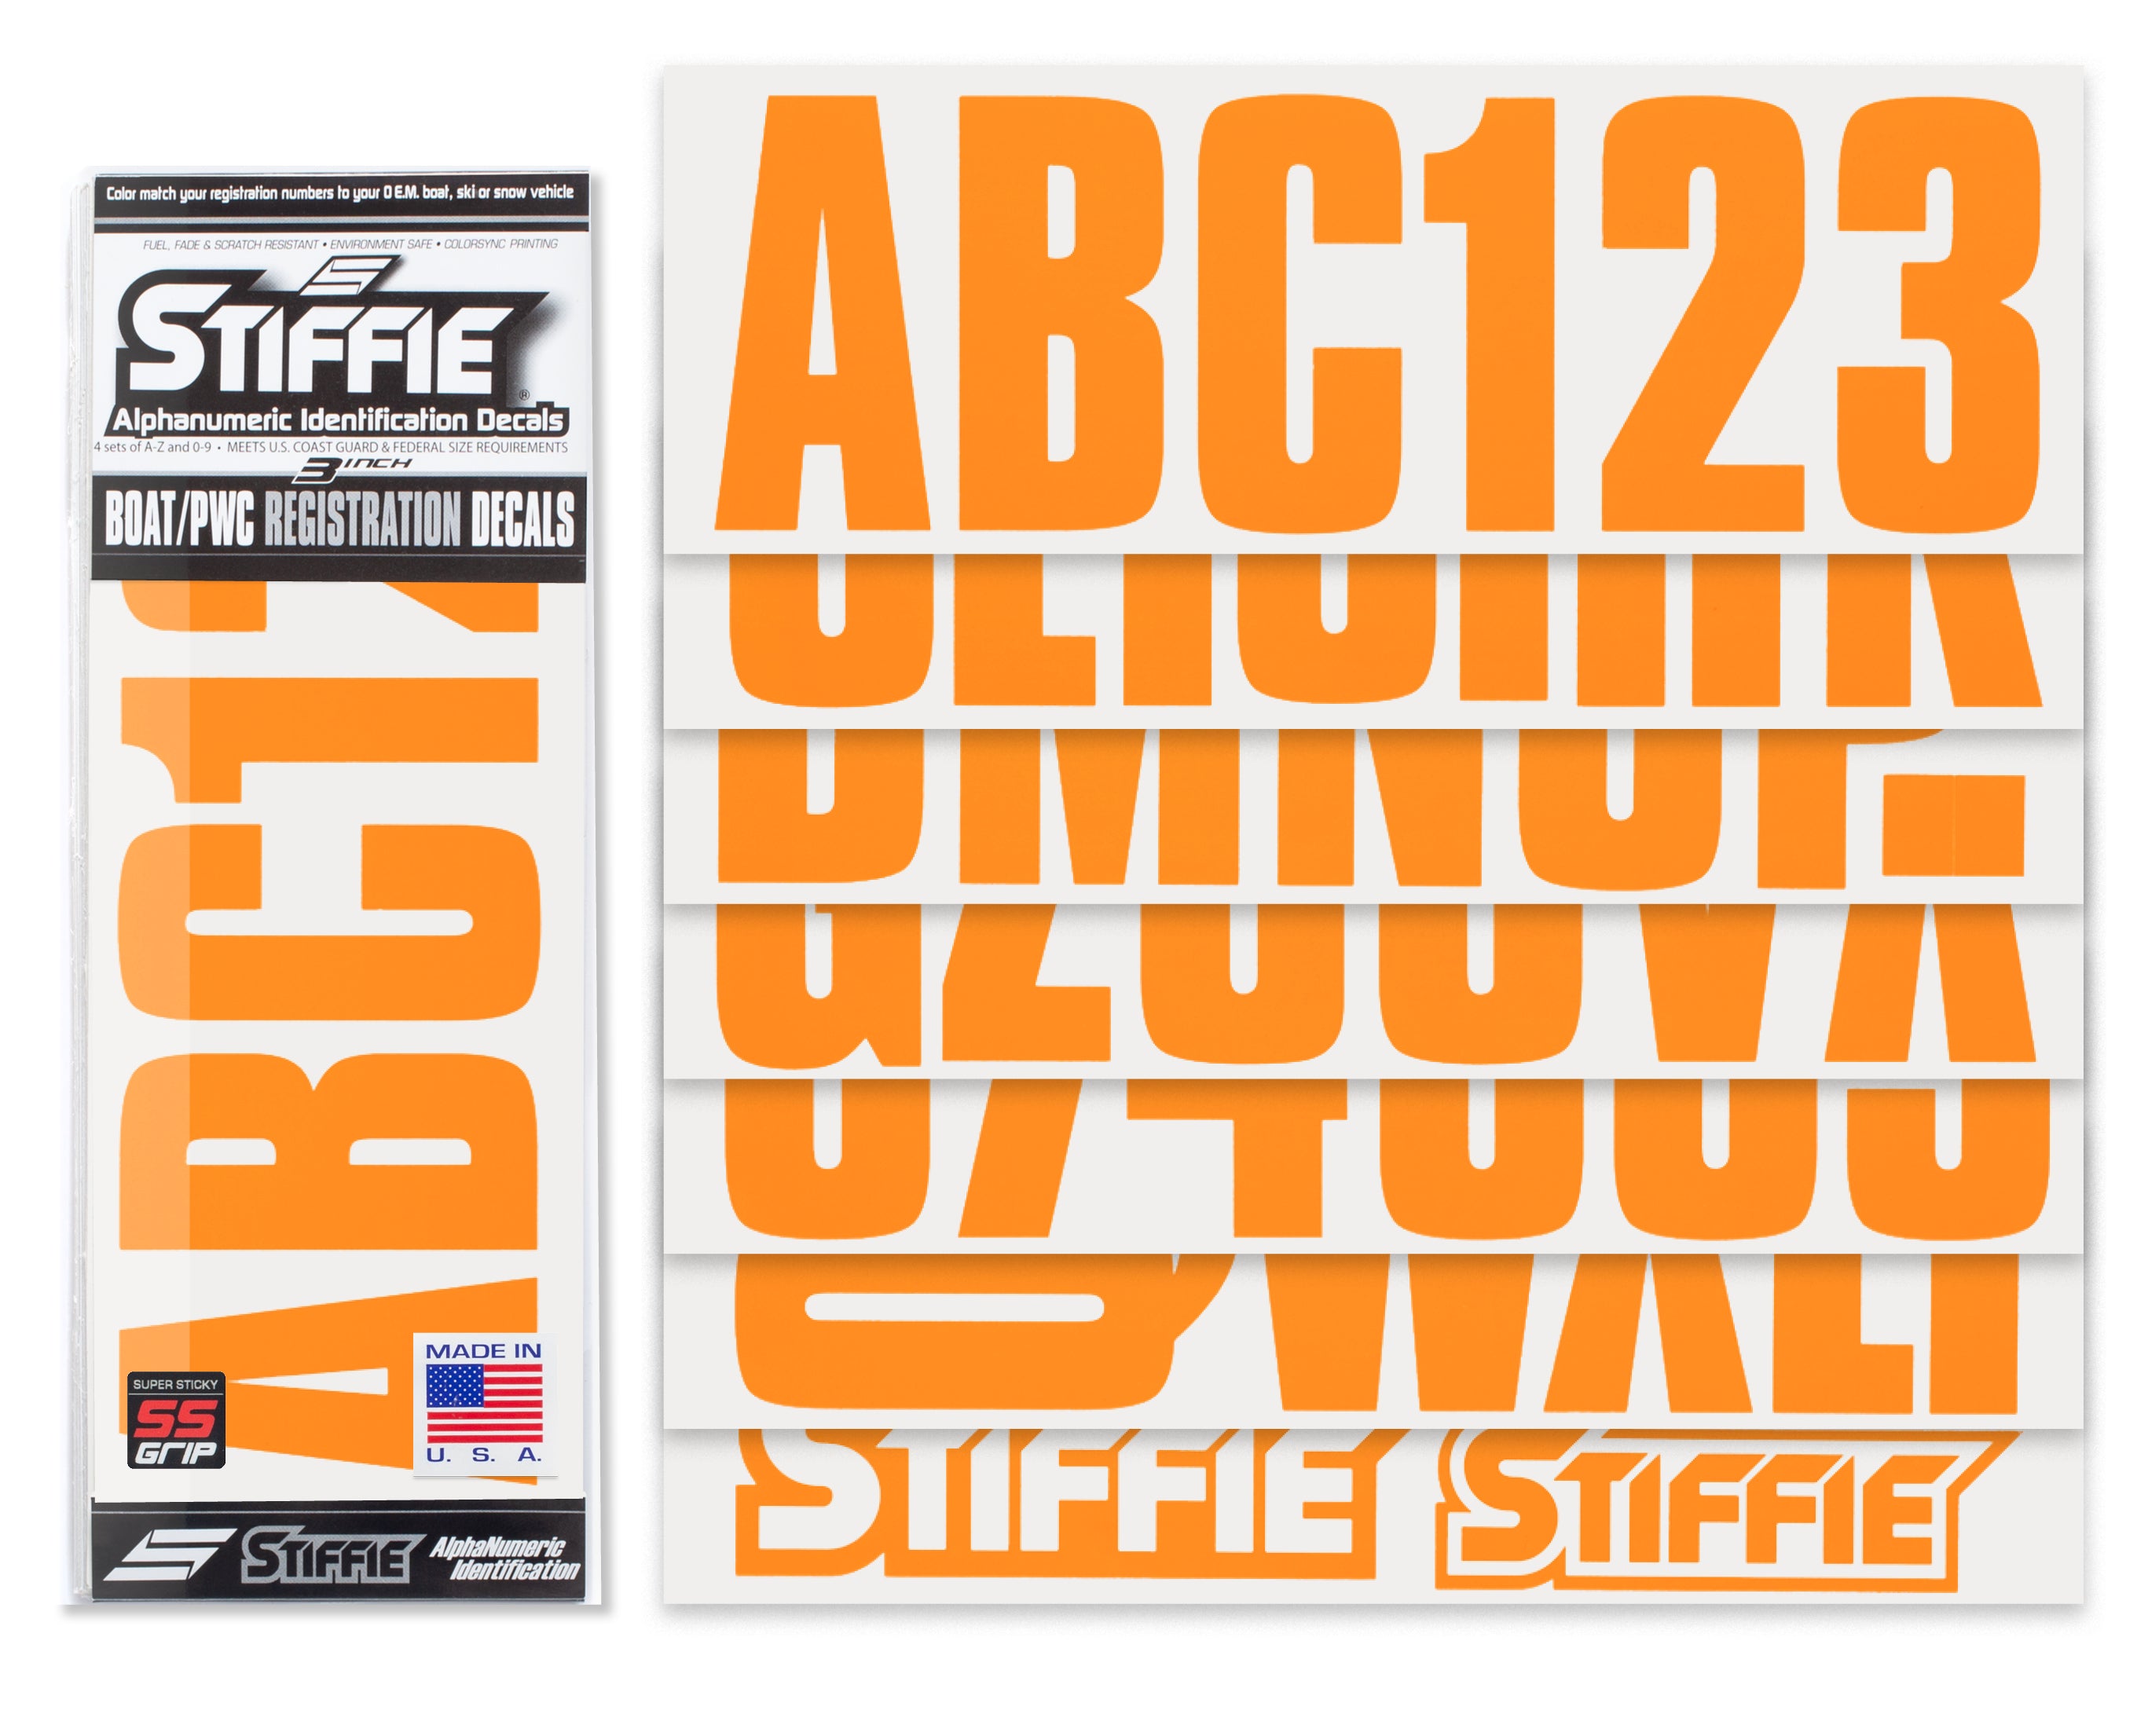 STIFFIE Uniline Orange Crush Super Sticky 3" Alpha Numeric Registration Identification Numbers Stickers Decals for Sea-Doo Spark, Inflatable Boats, Ribs, Hypalon/PVC, PWC and Boats